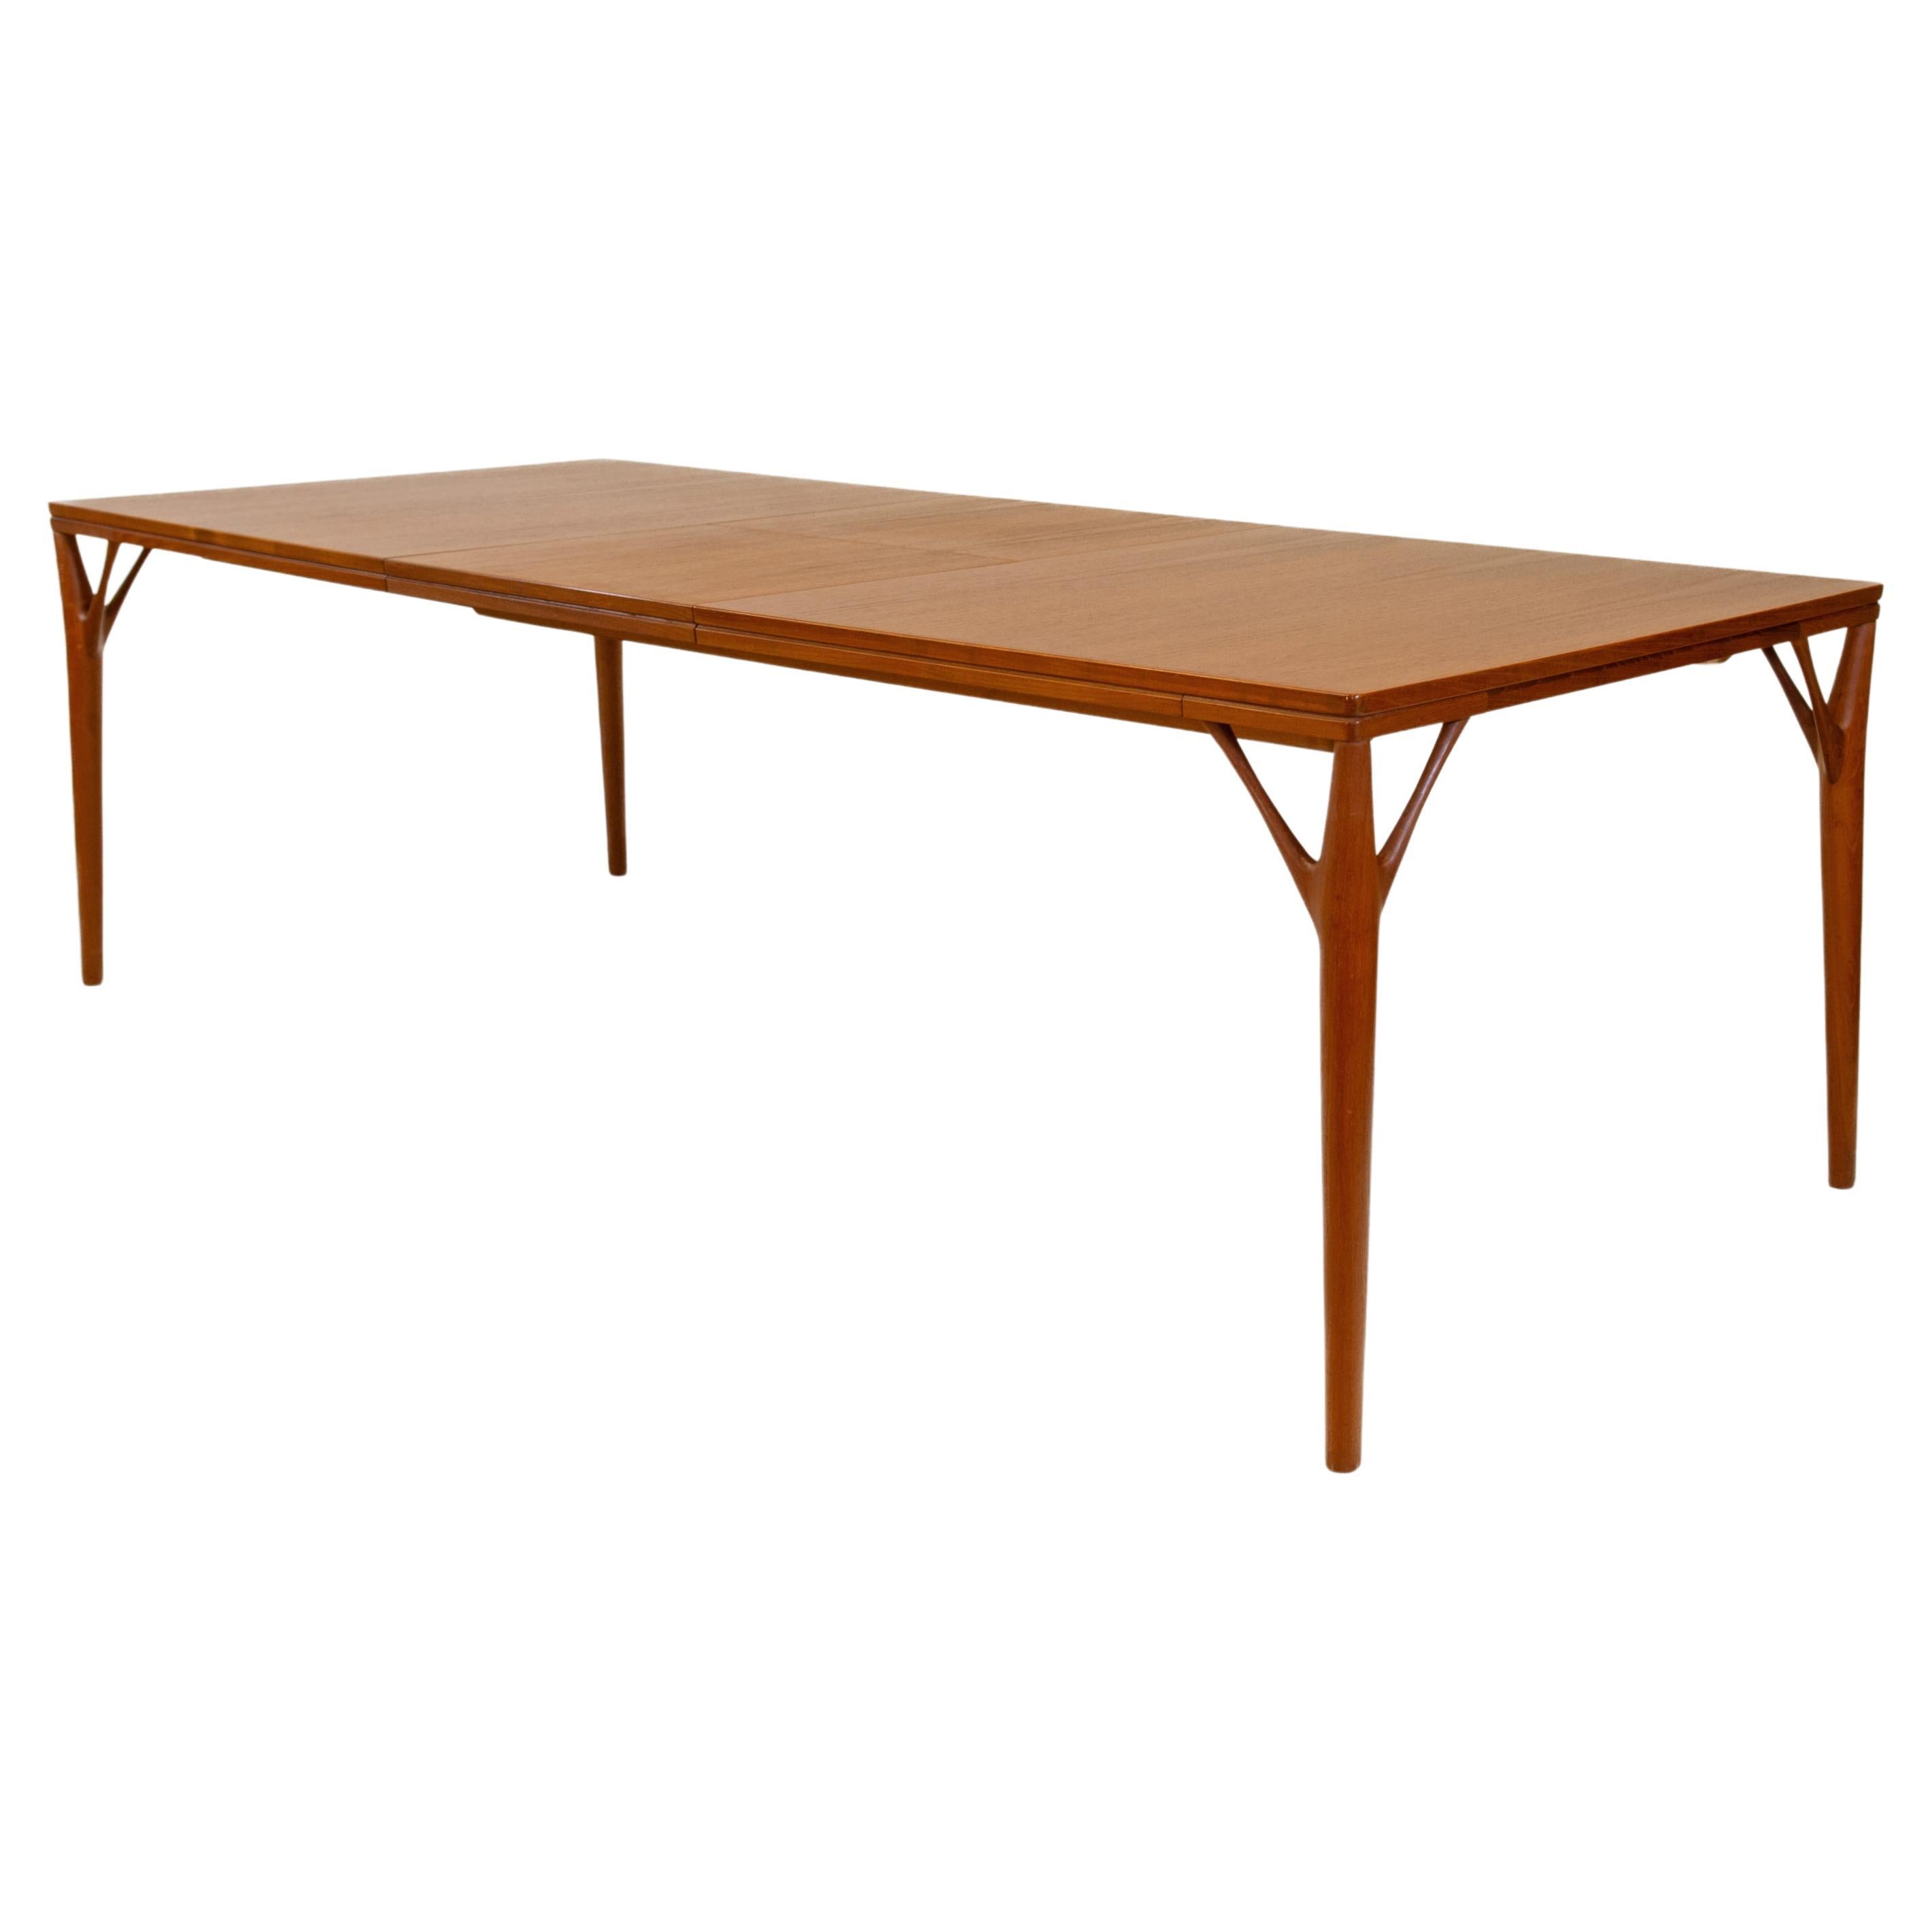 Danish Teak ‘Tree Leg’ Mid Century Extending Large Dining Table By H Sigh & Sons For Sale